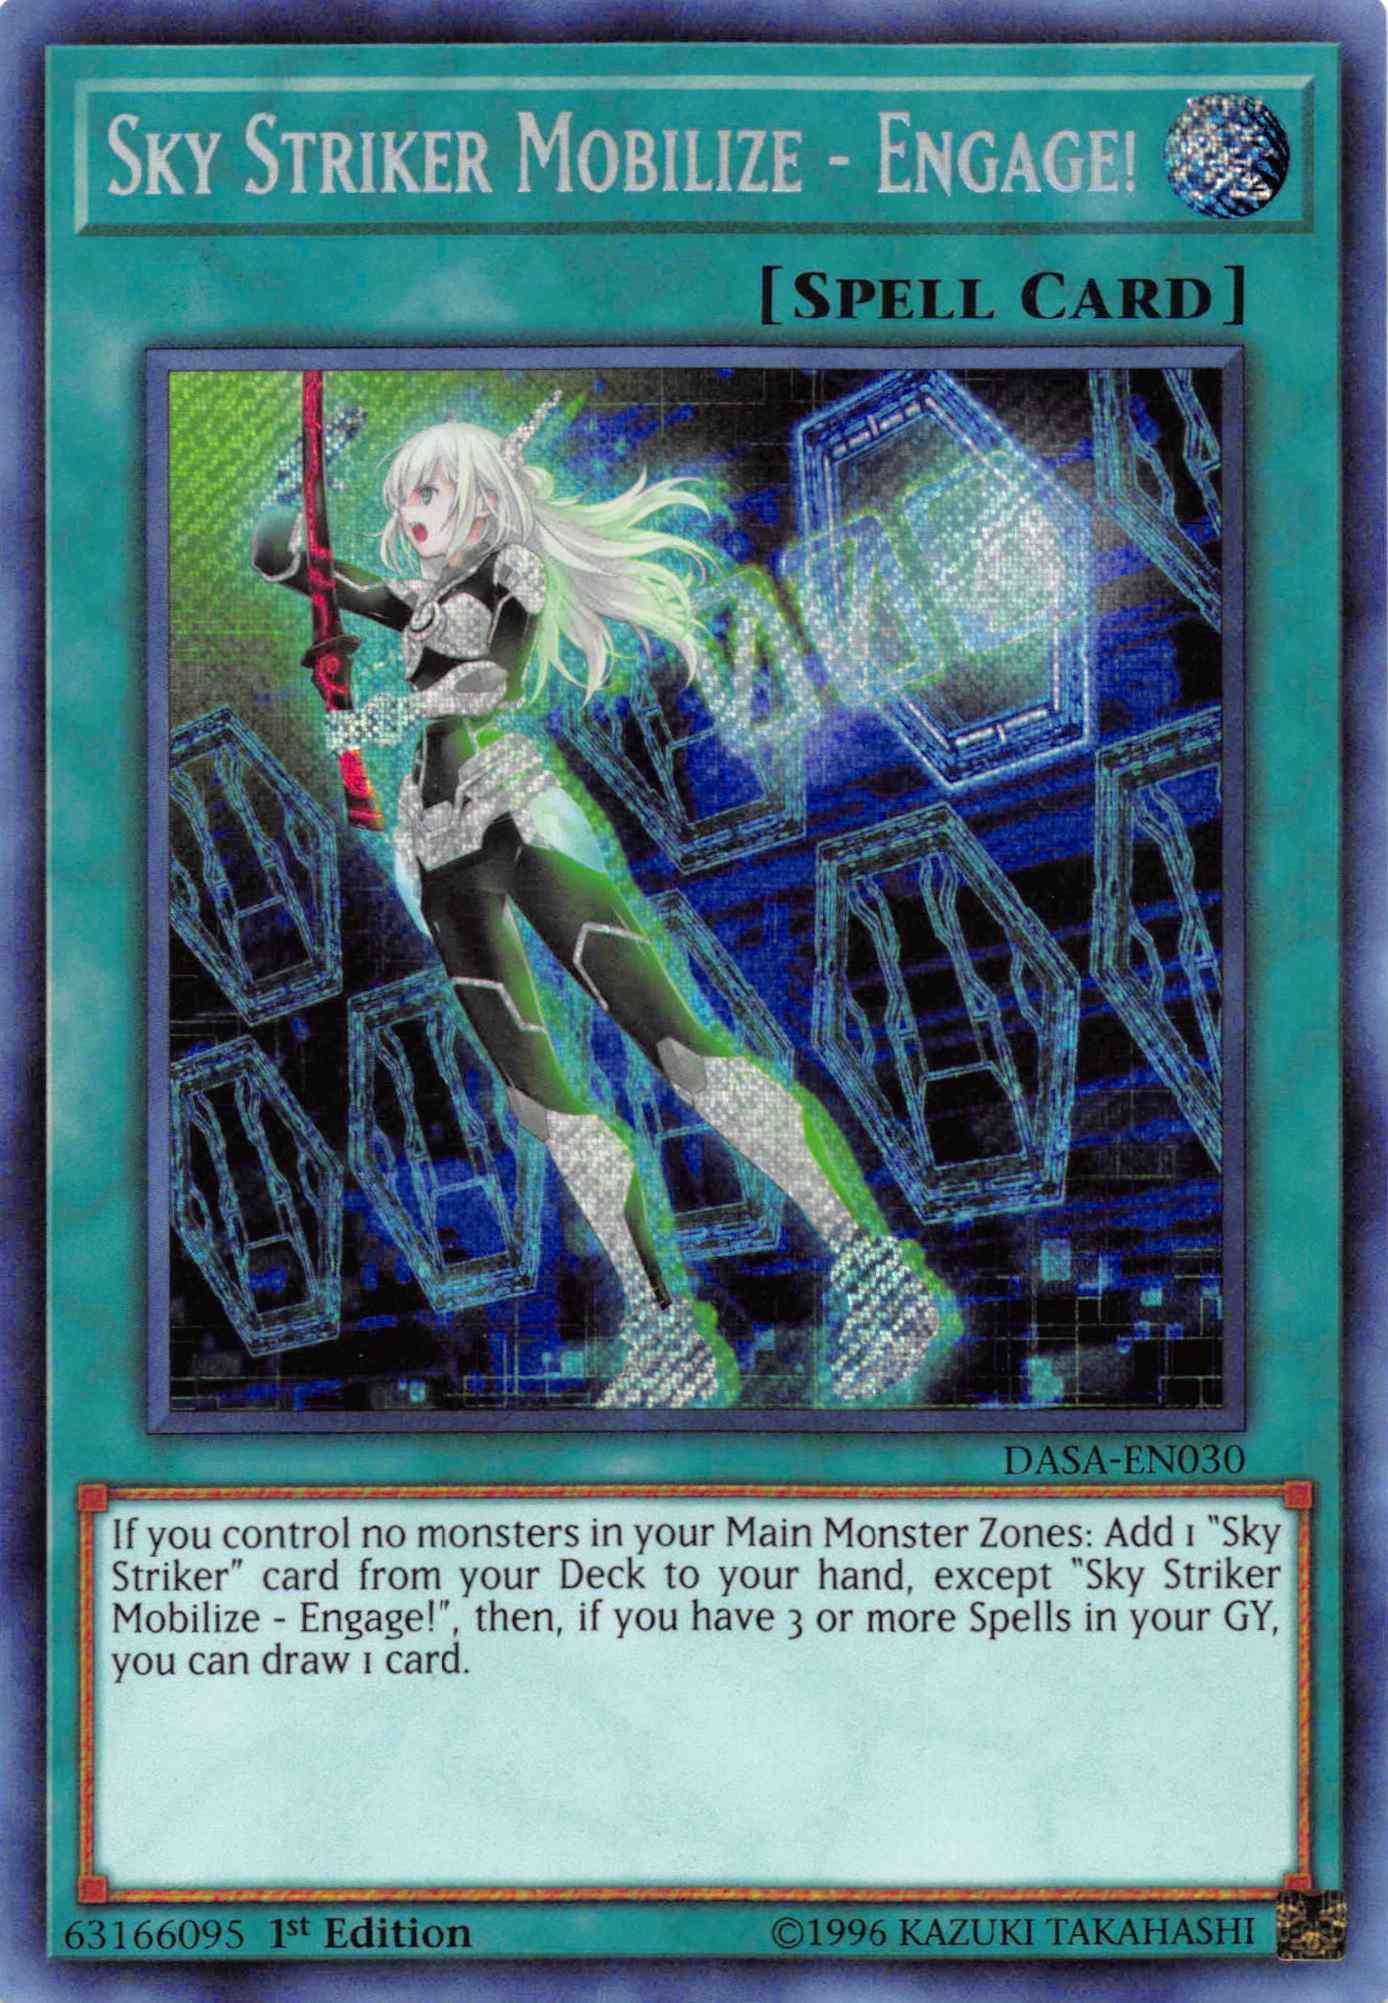 Improved Card Image Quality - Project Clarity